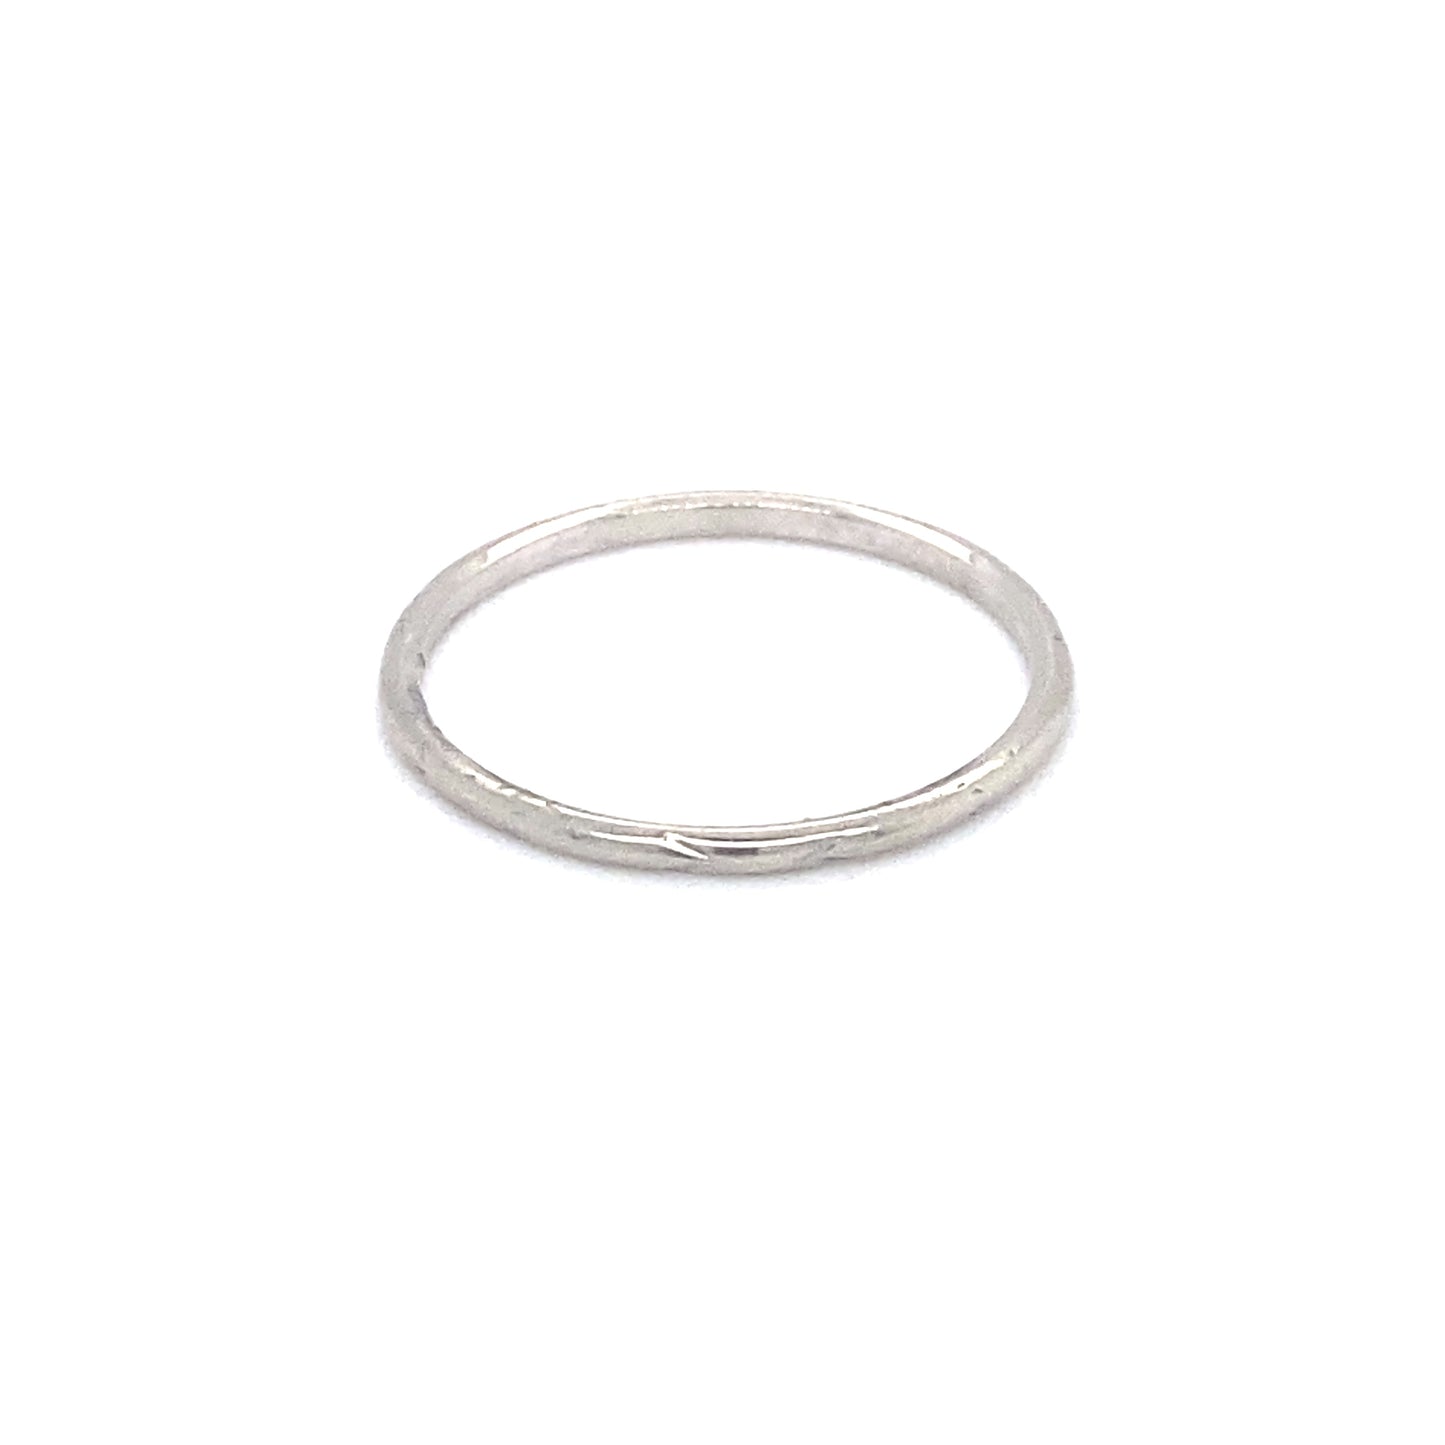 Circa 1920s Etched Wedding Band in 18K White Gold